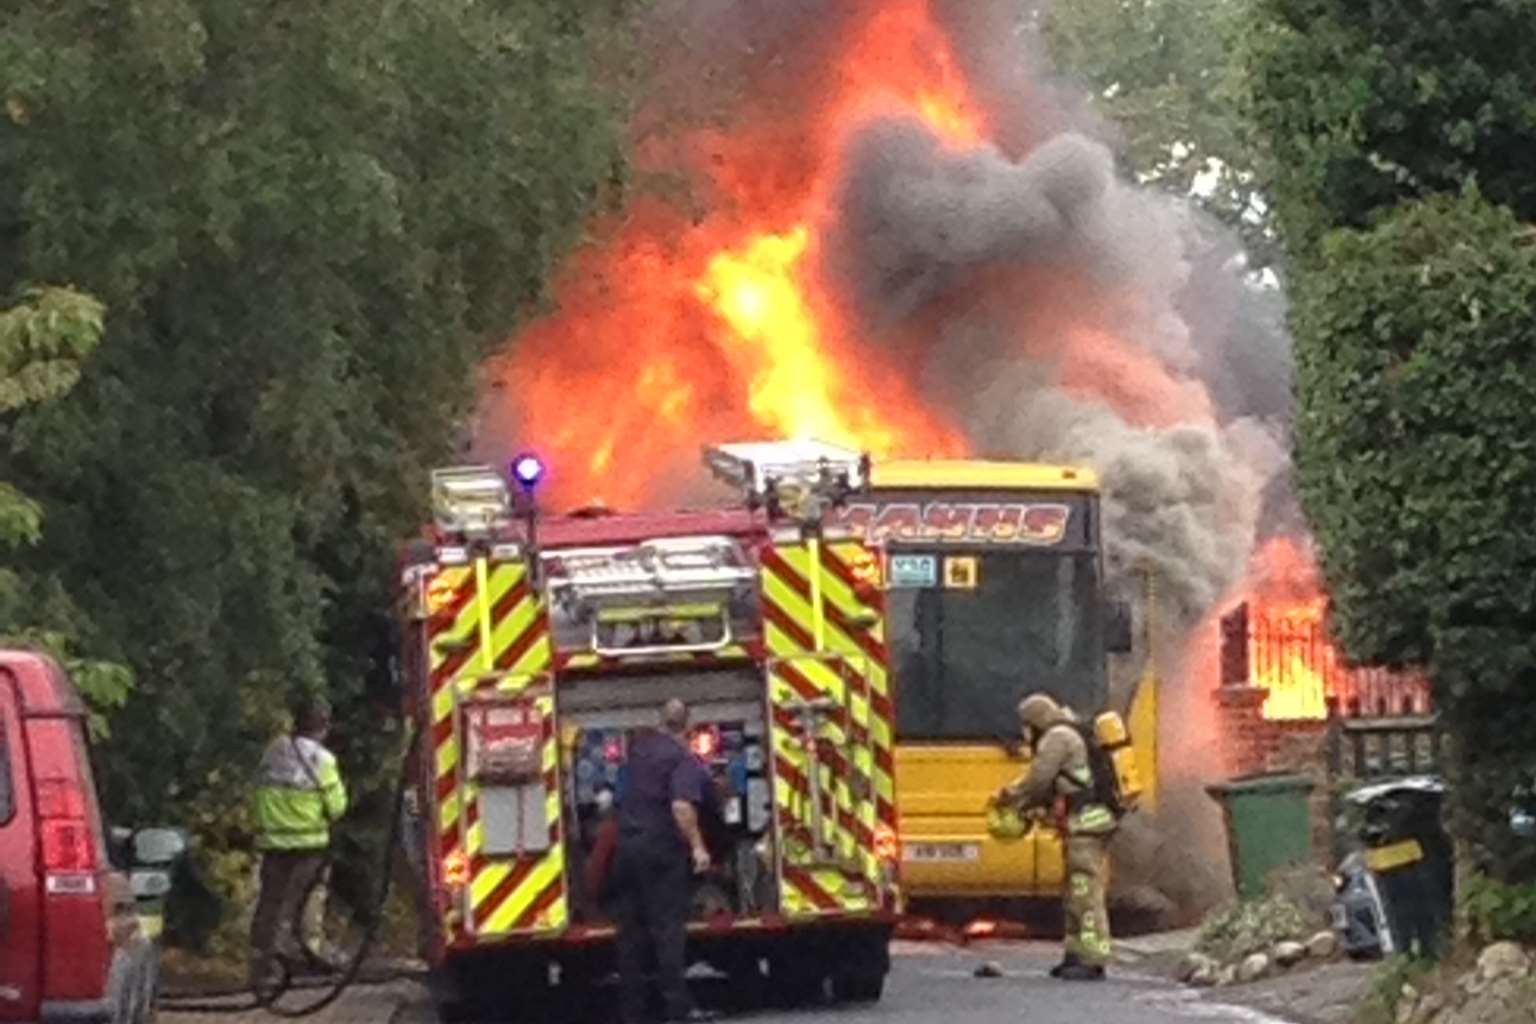 The coach erupted into a fireball outside Platts Heath Primary School. Picture: Nipper